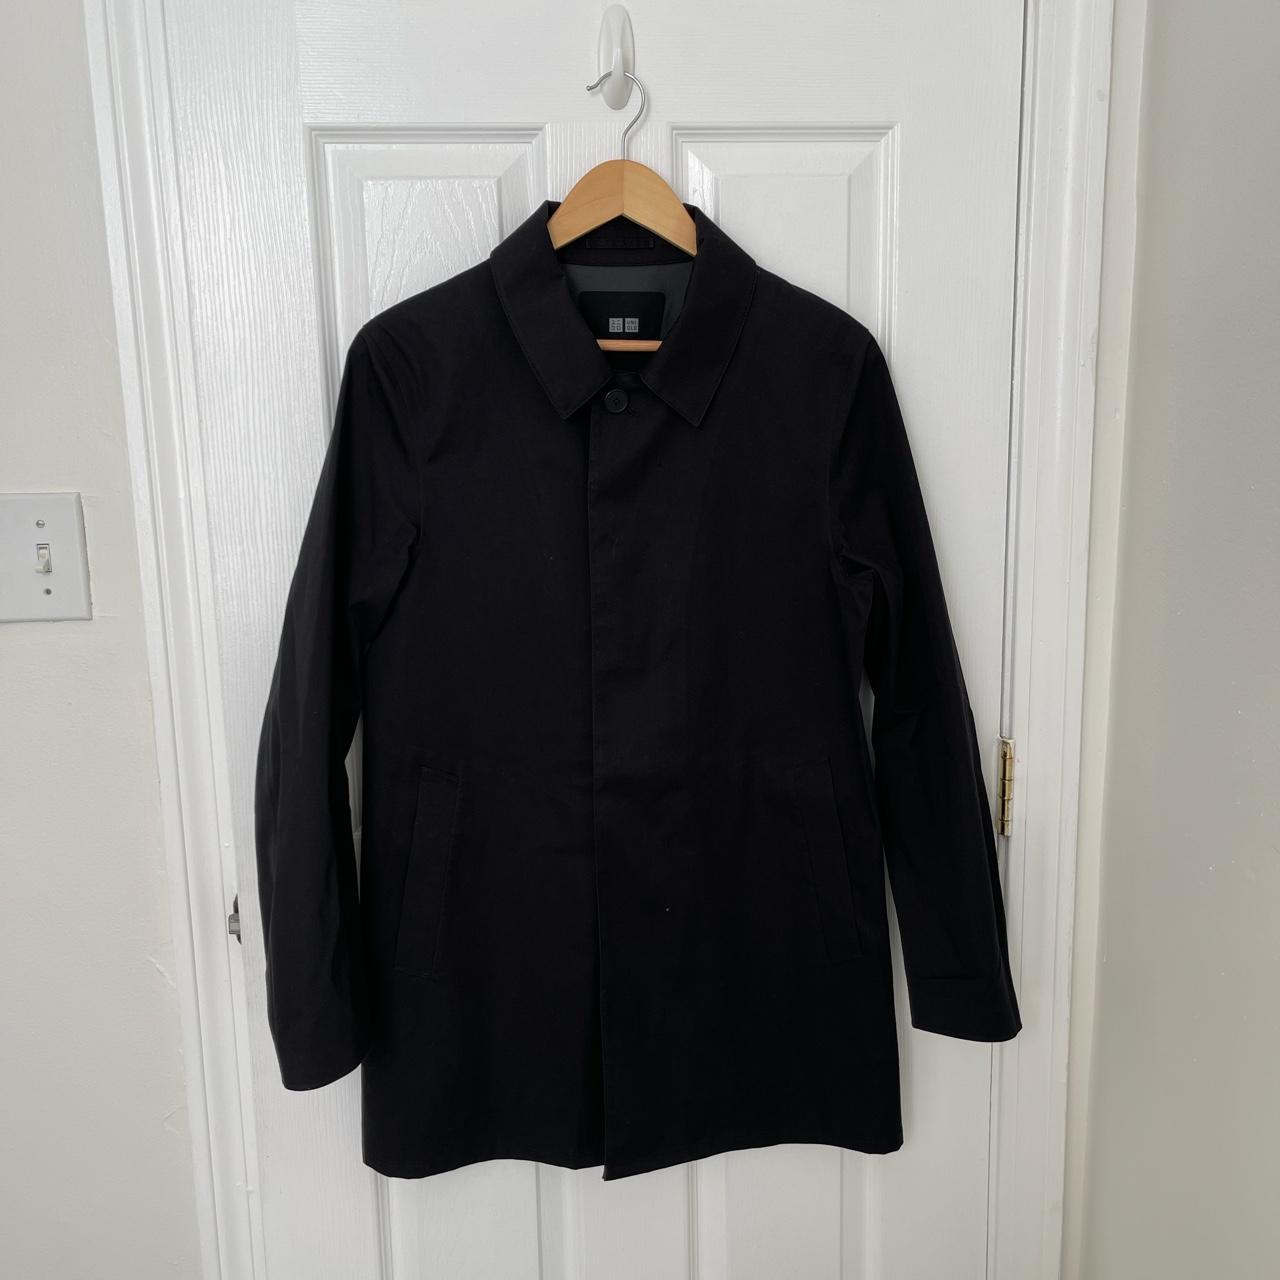 Uniqlo mac coat bought a couple of years ago, top... - Depop